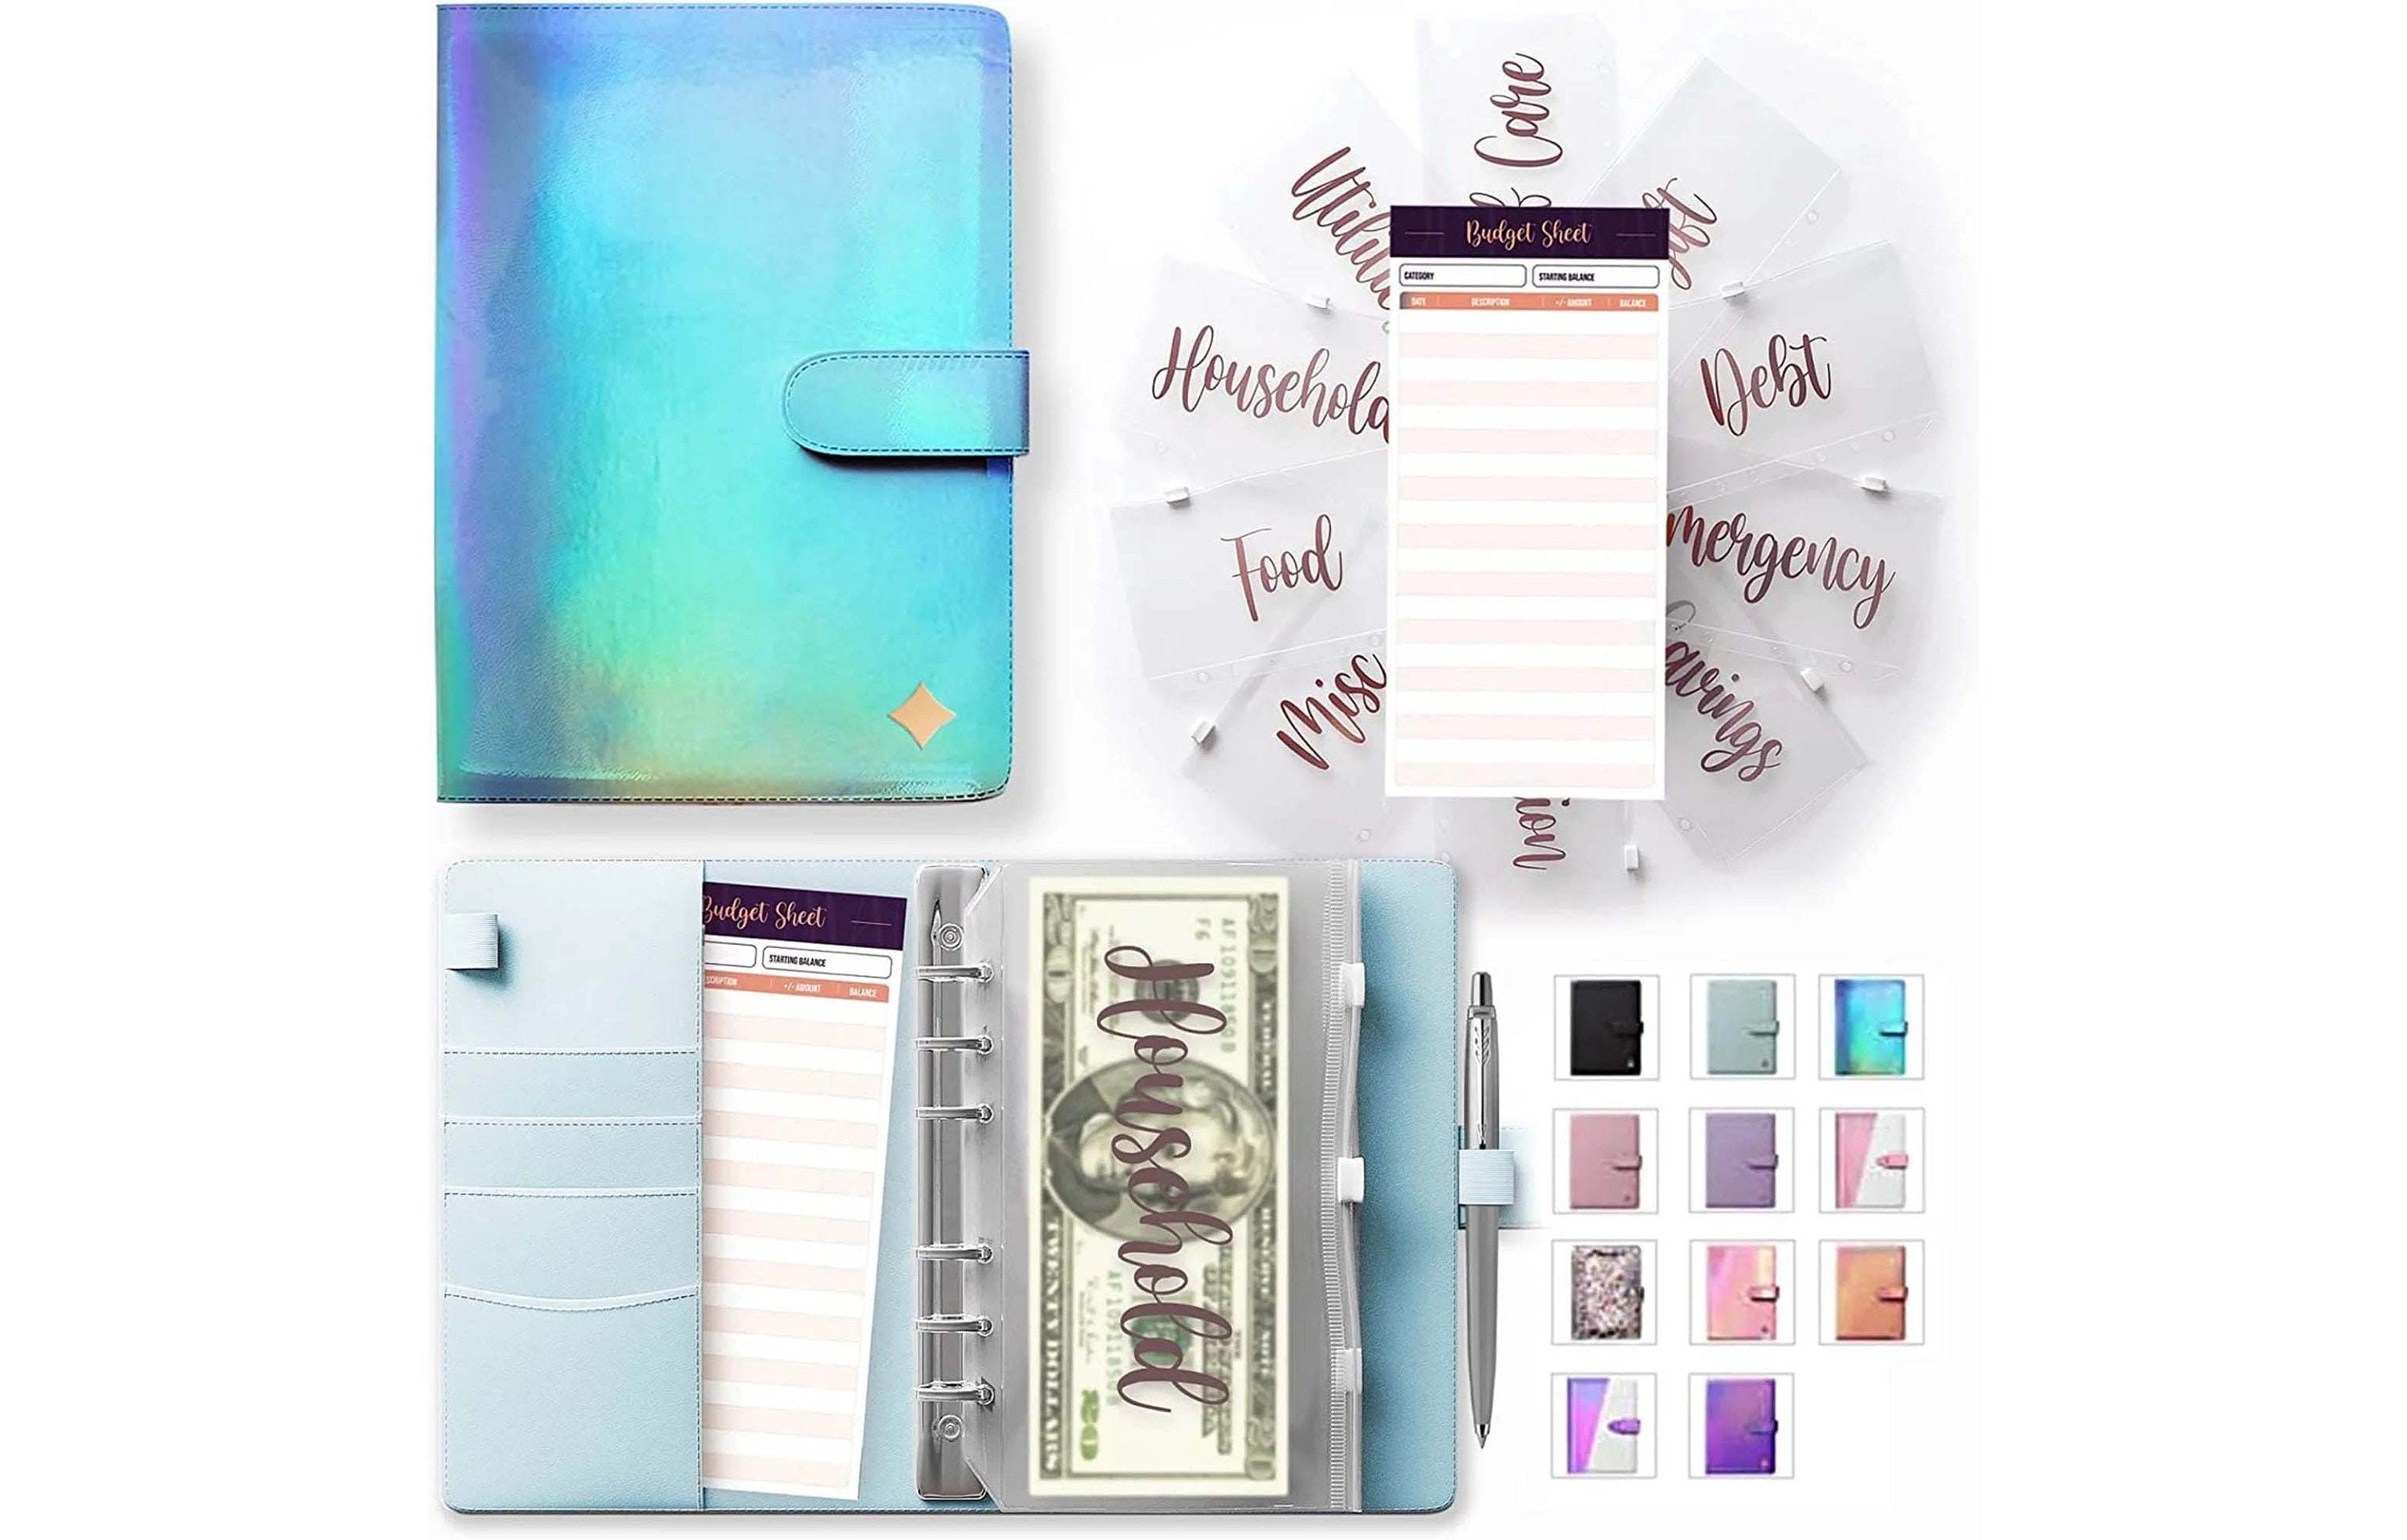  SOUL MAMA PVC A6 Budget Binder With Cash Envelopes for  Budgeting - Cute Daisy Purple Money Organizer For Cash Budget Binder, Clear  Budgeting Planner Money Savings binder, Savings Challenges book 